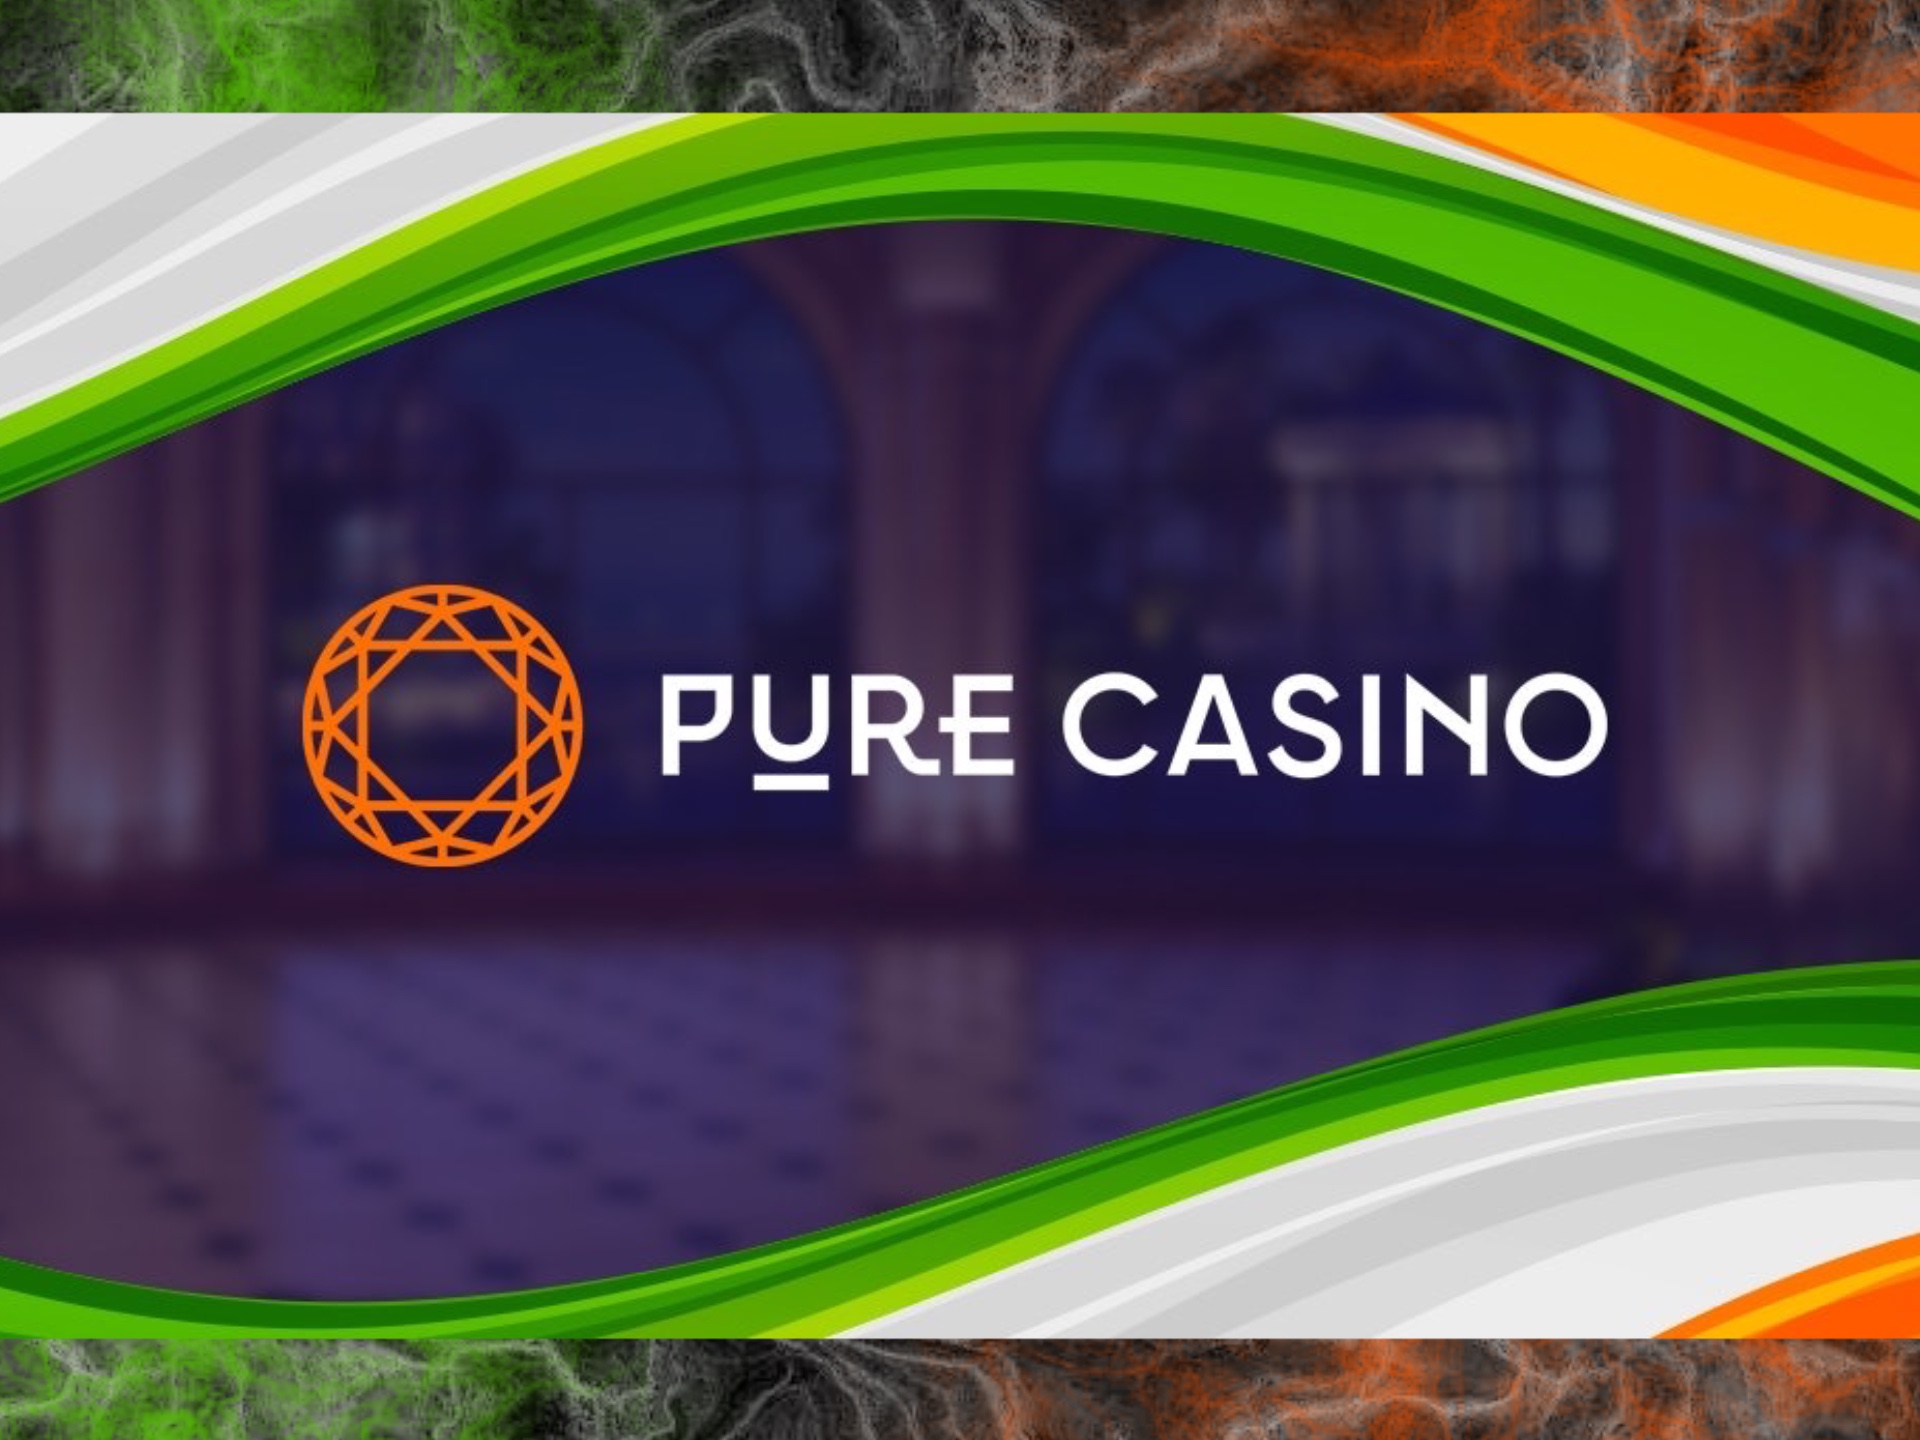 If you like Pure Casino you will be glad to know, that it accepts UPI payments.